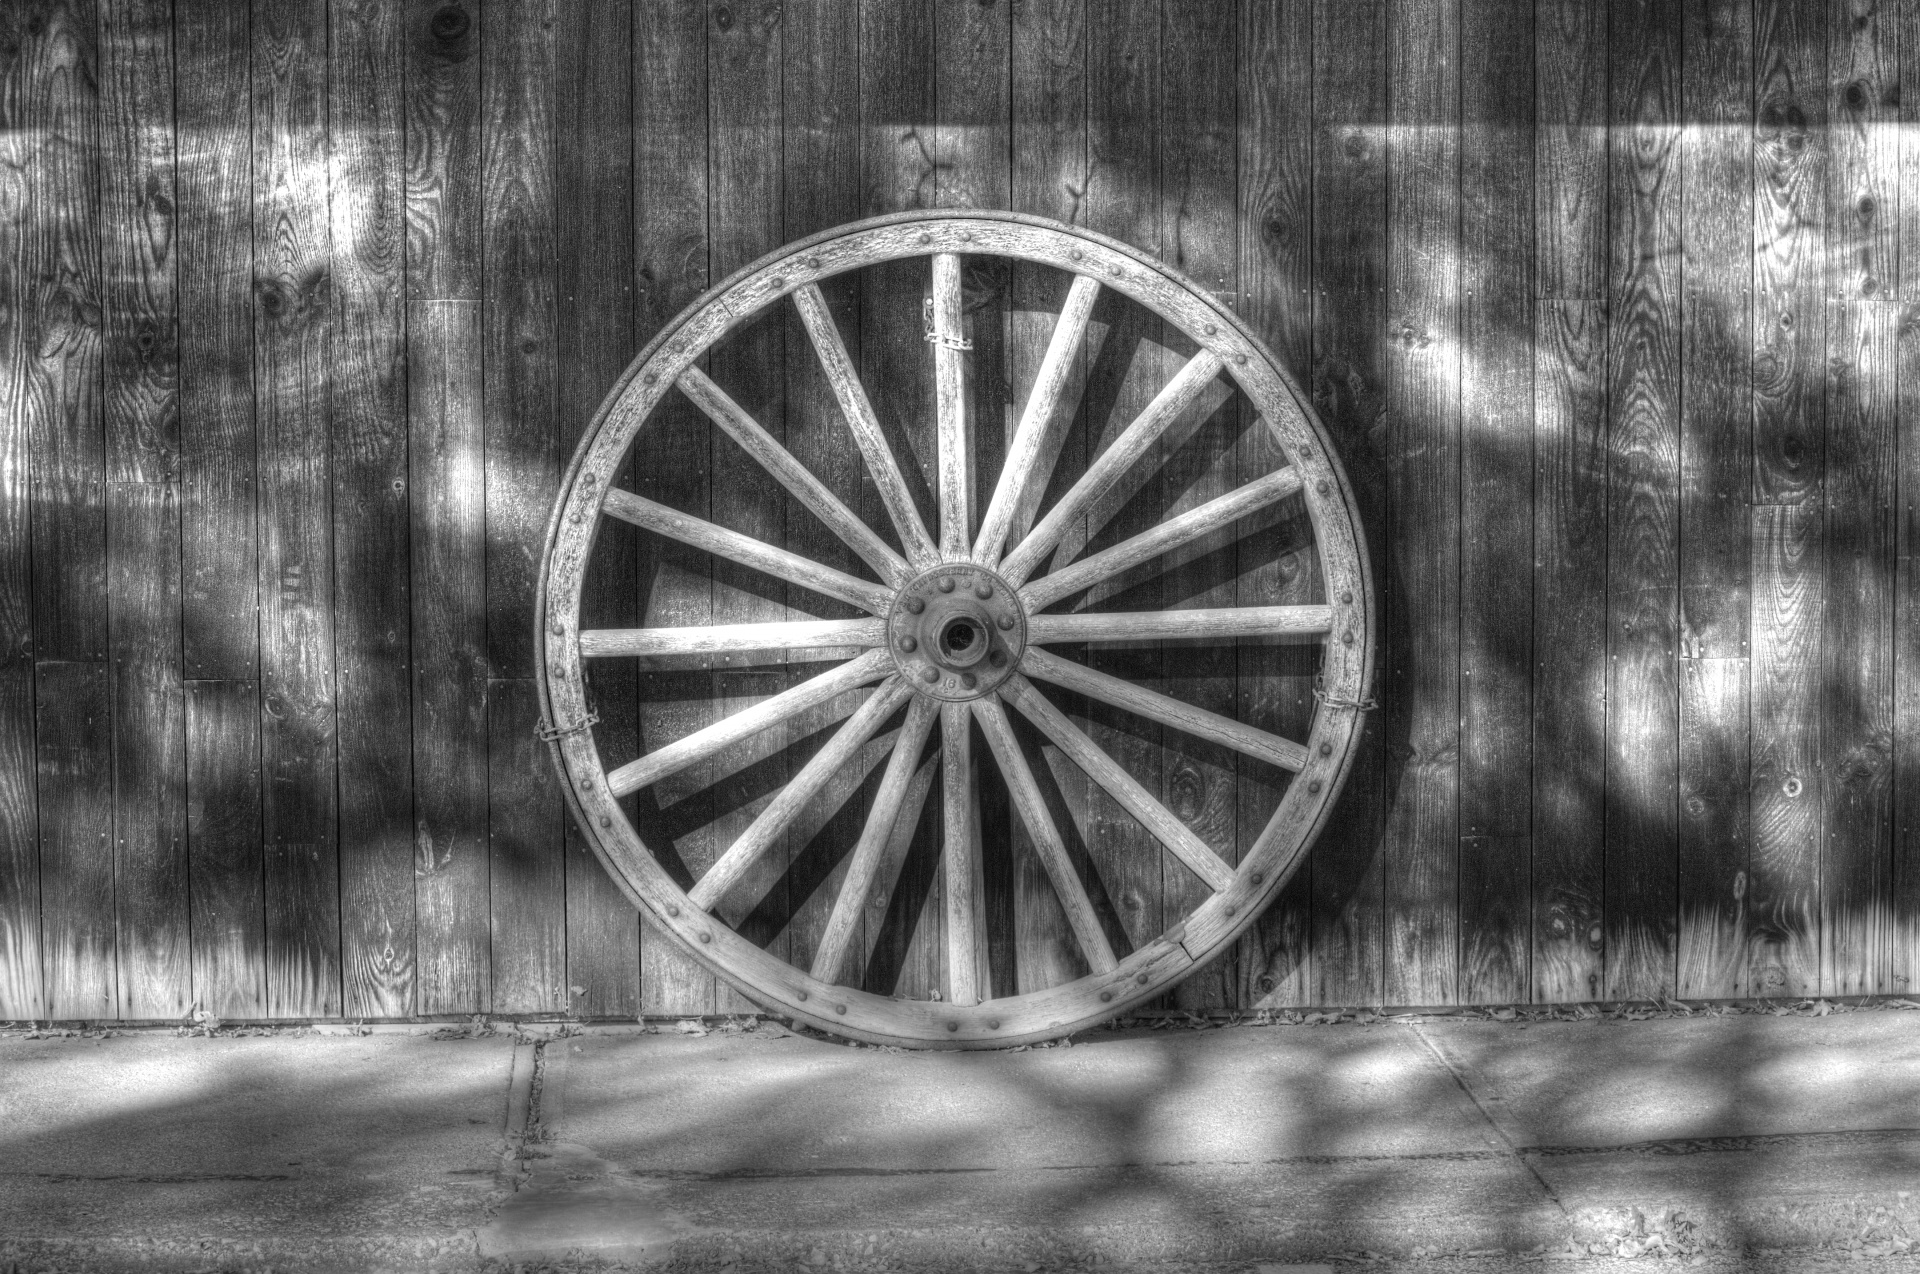 artistic touch applied to photograph of old wagon wheel - black and white